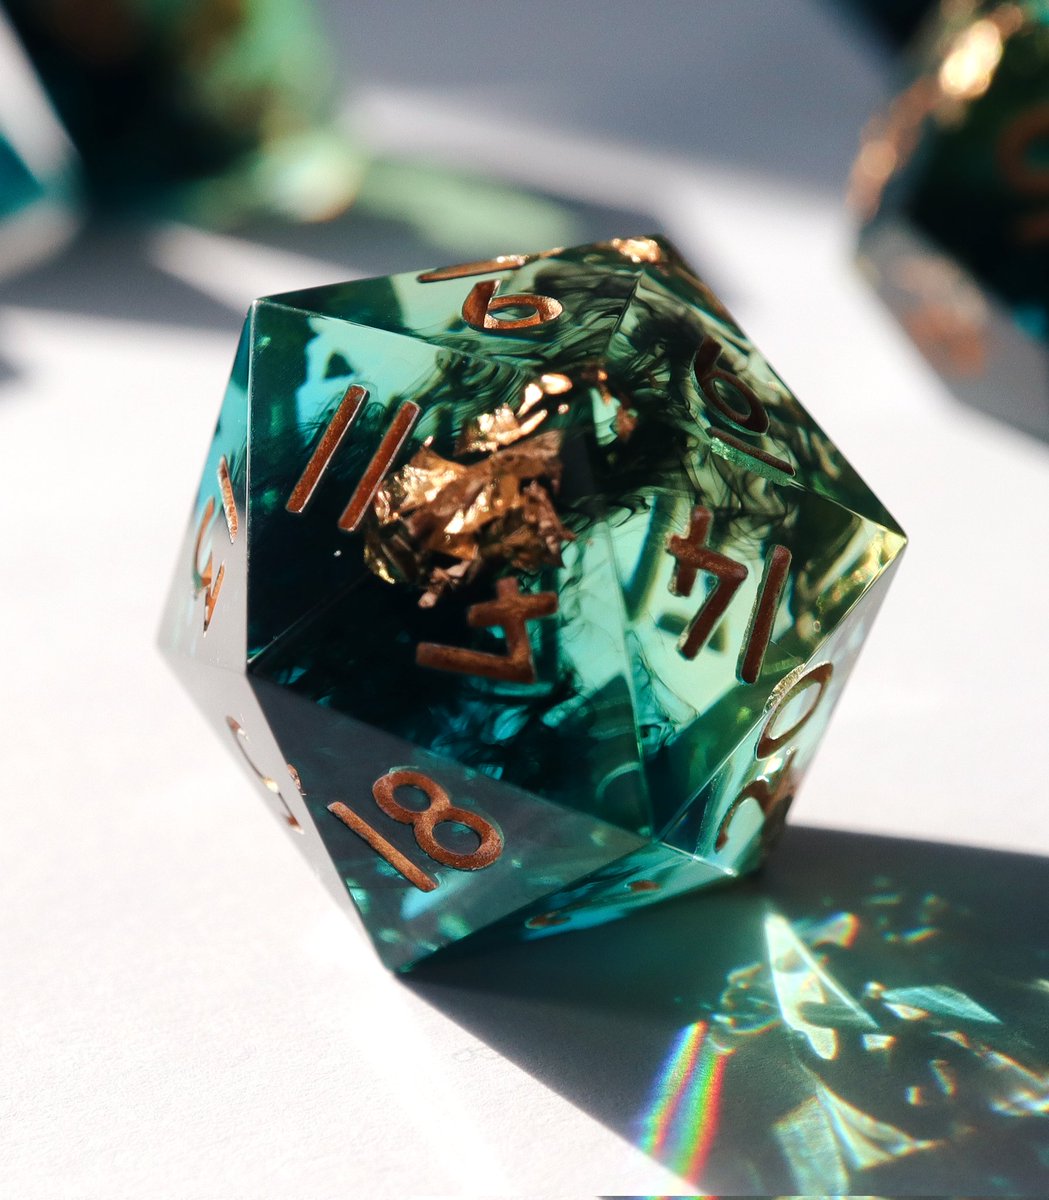 New 2022 photos for Sublime Blight! Showing off that flowing smoke ✨️ #dnd #ttrpg #dice